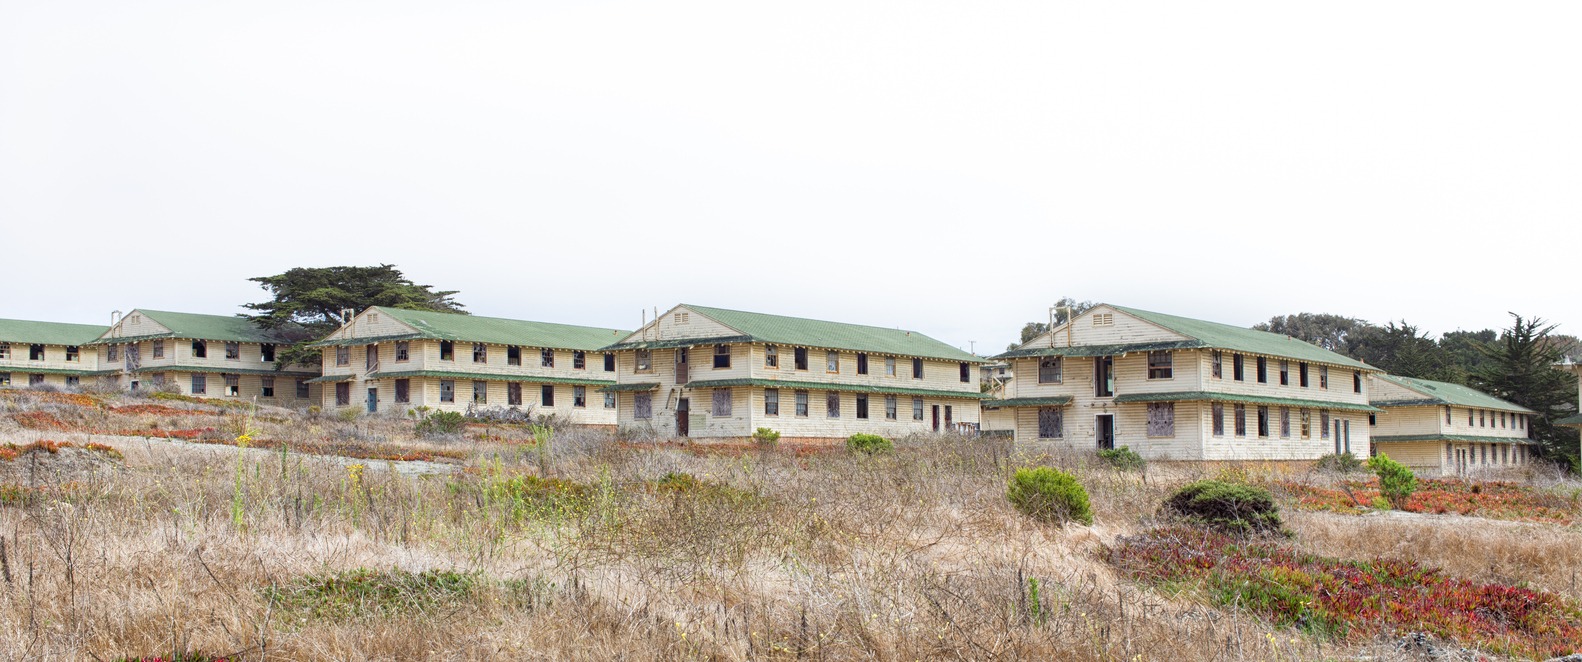 the abandoned Fort Ord military base in California